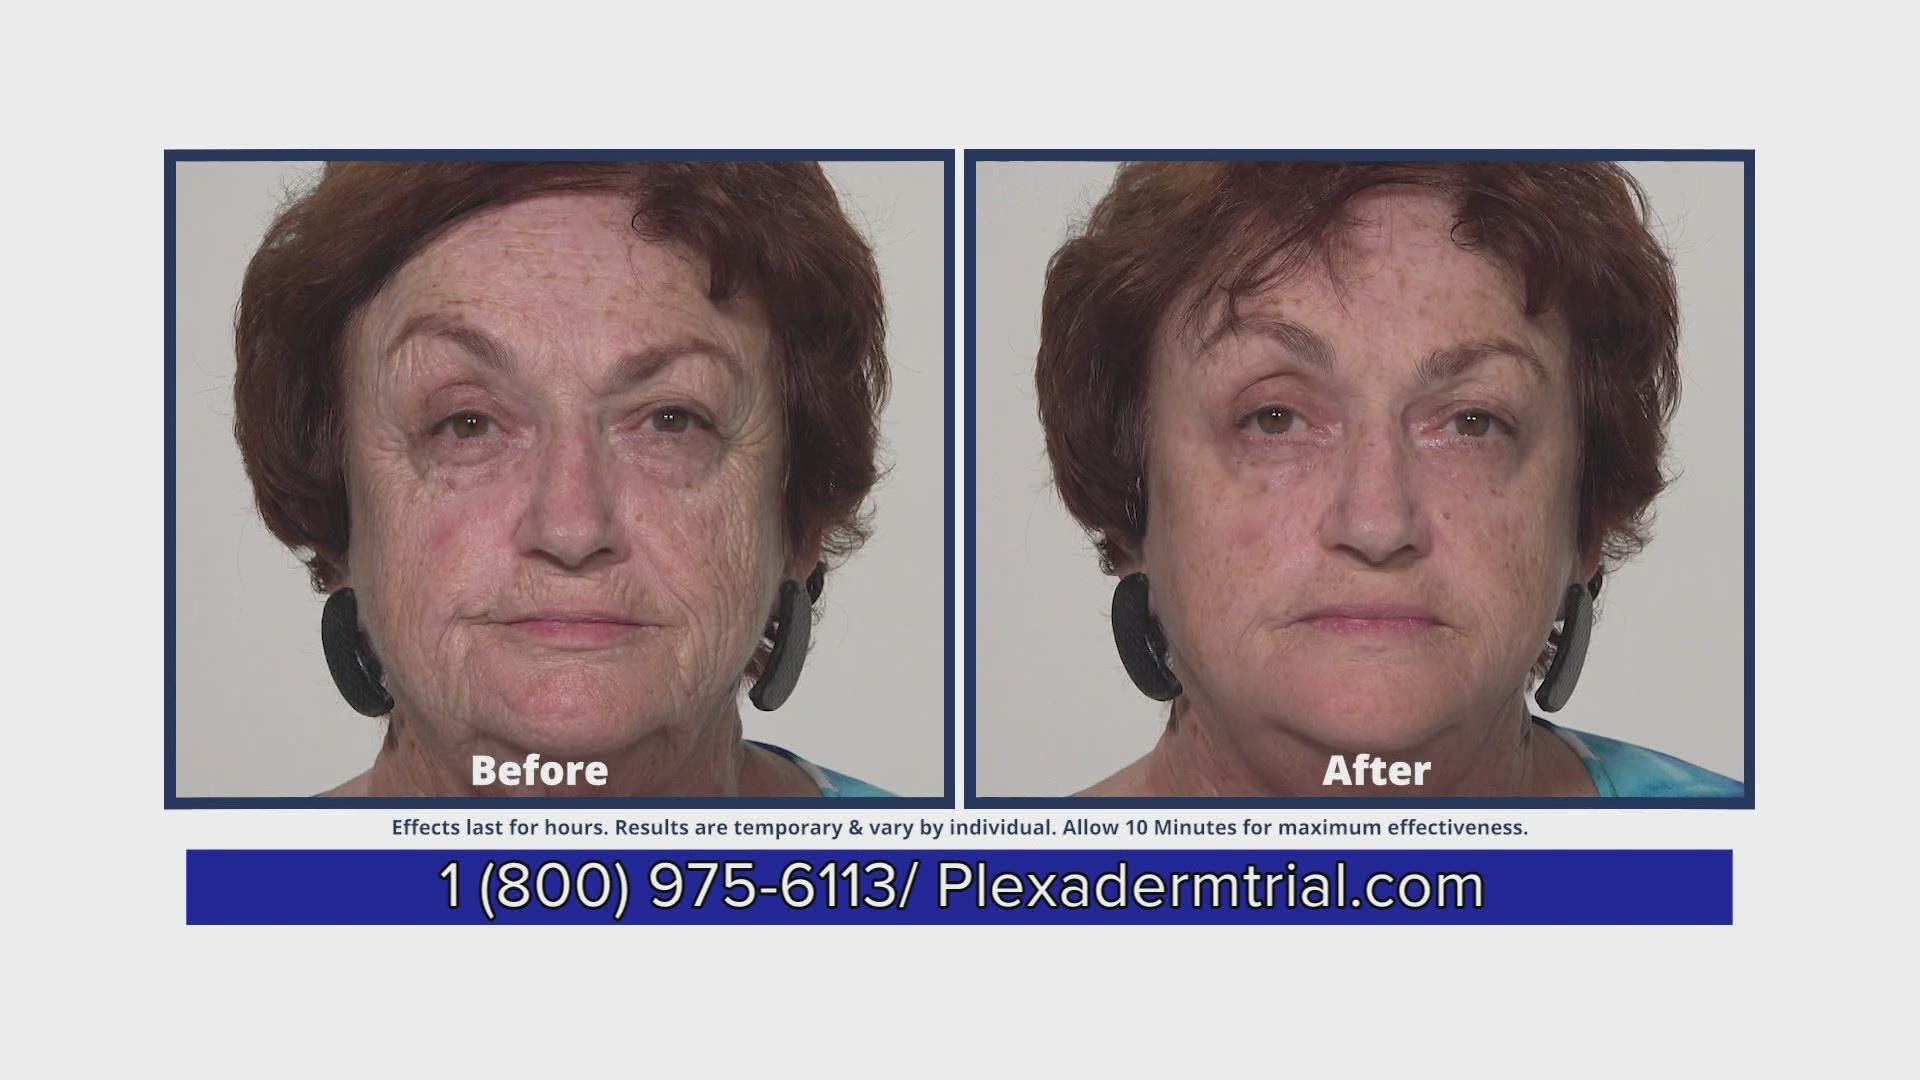 See how Plexaderm can shrink your under-eye bags and wrinkles from view.